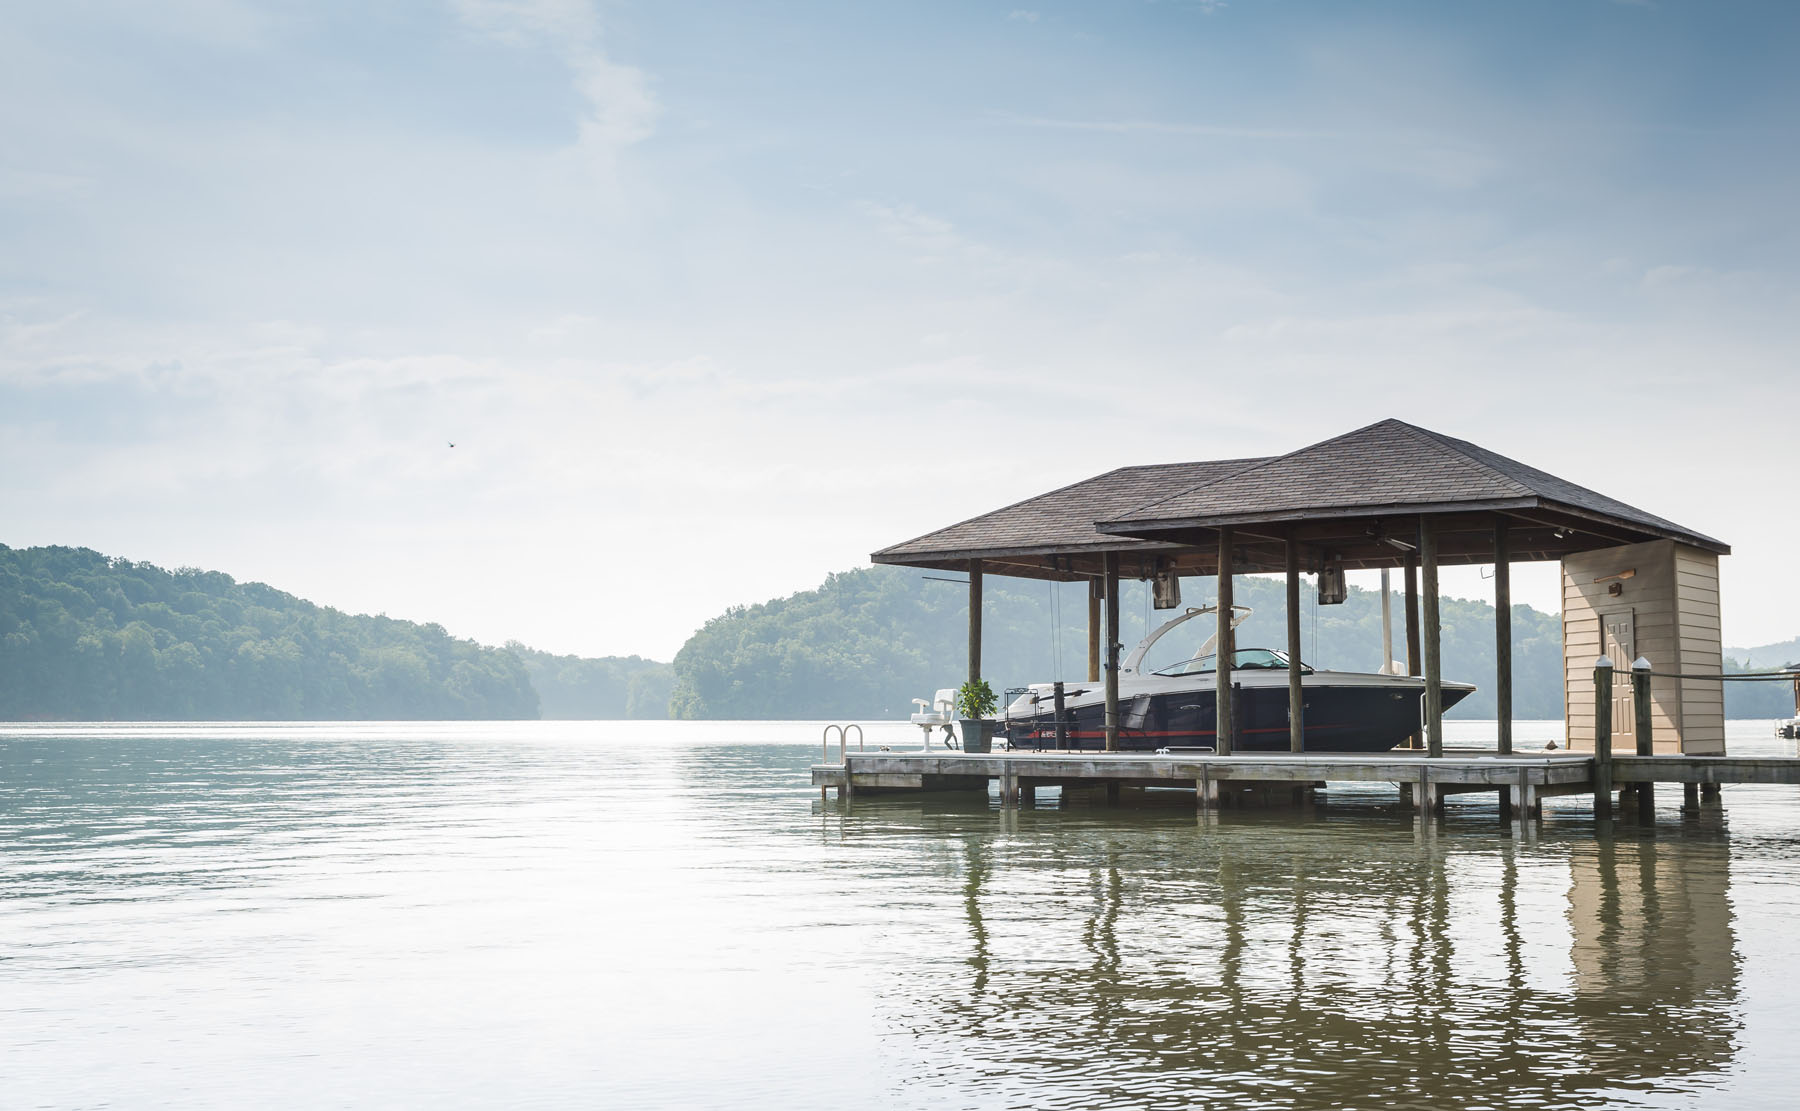 Tennessee Boating & Yacht Photographer Steinberger